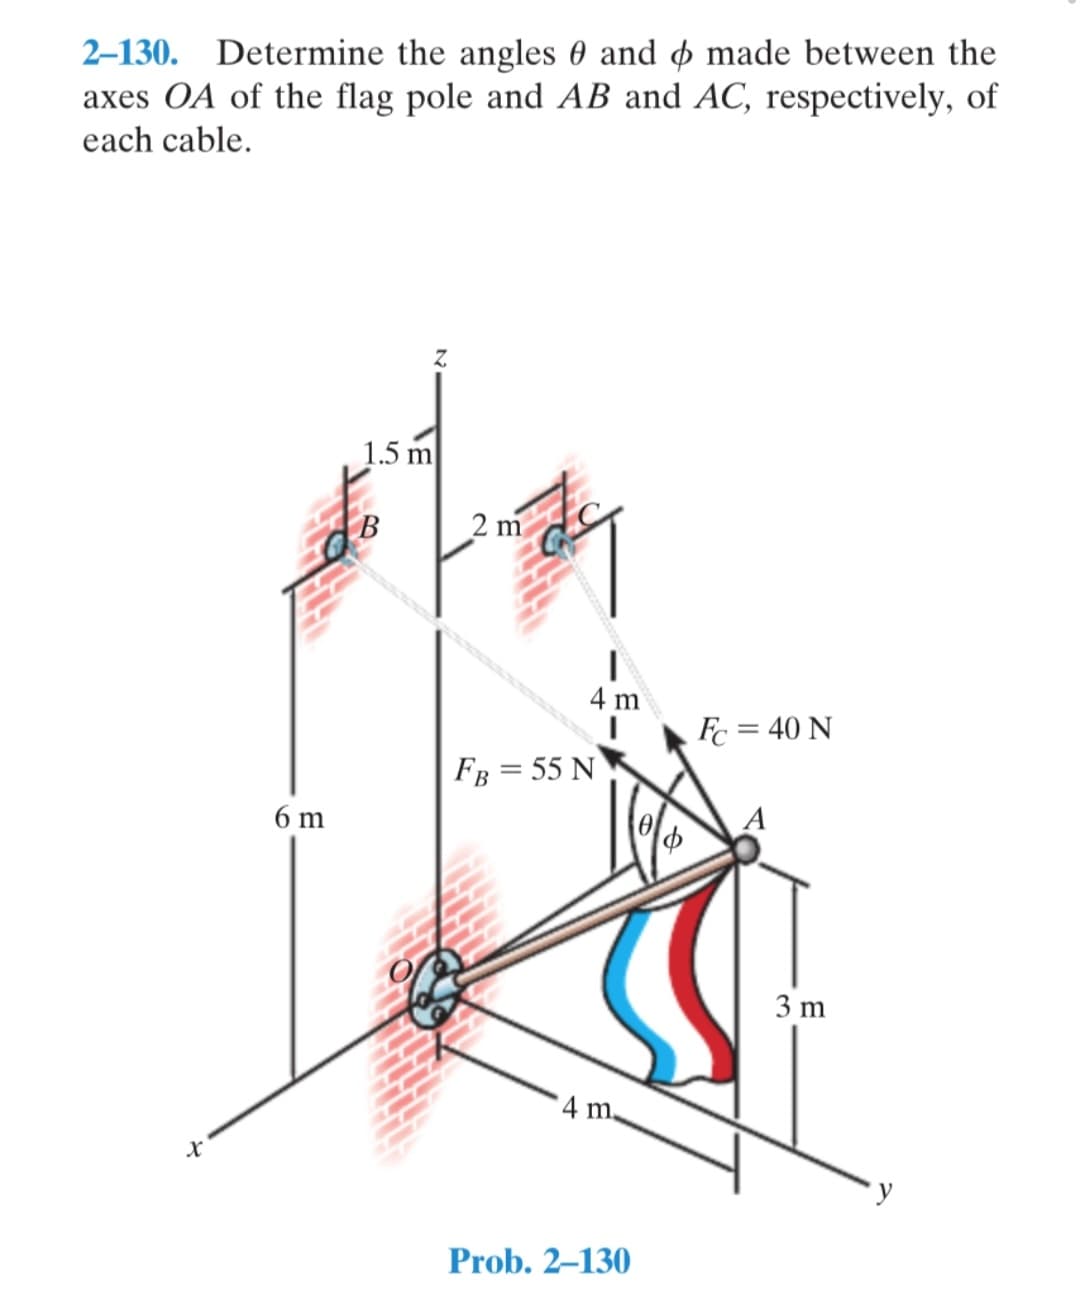 2-130. Determine the angles and made between the
axes OA of the flag pole and AB and AC, respectively, of
each cable.
X
6 m
1.5 m
B
2 m
4 m
FB = 55 N
4 m.
Prob. 2-130
Fc = 40 N
3 m